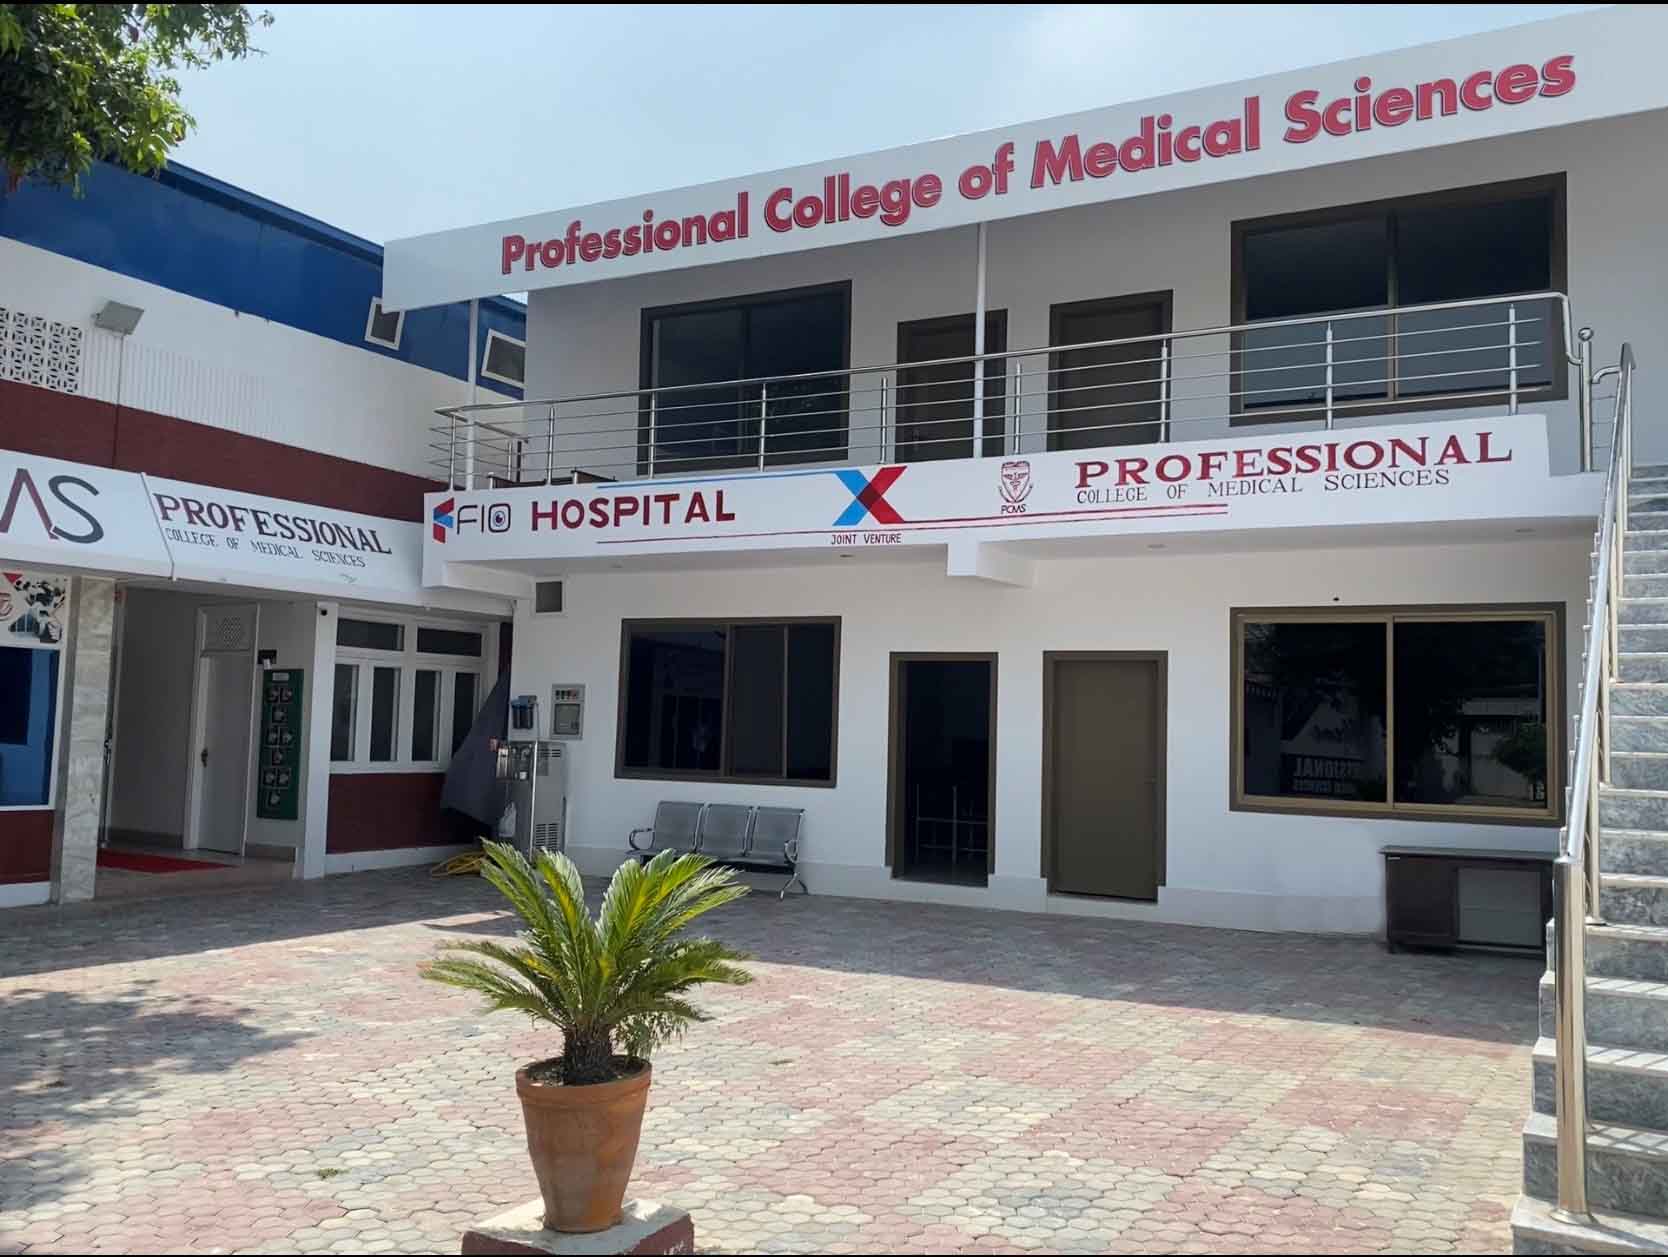 Professional College of Medical Sciences, PCMS